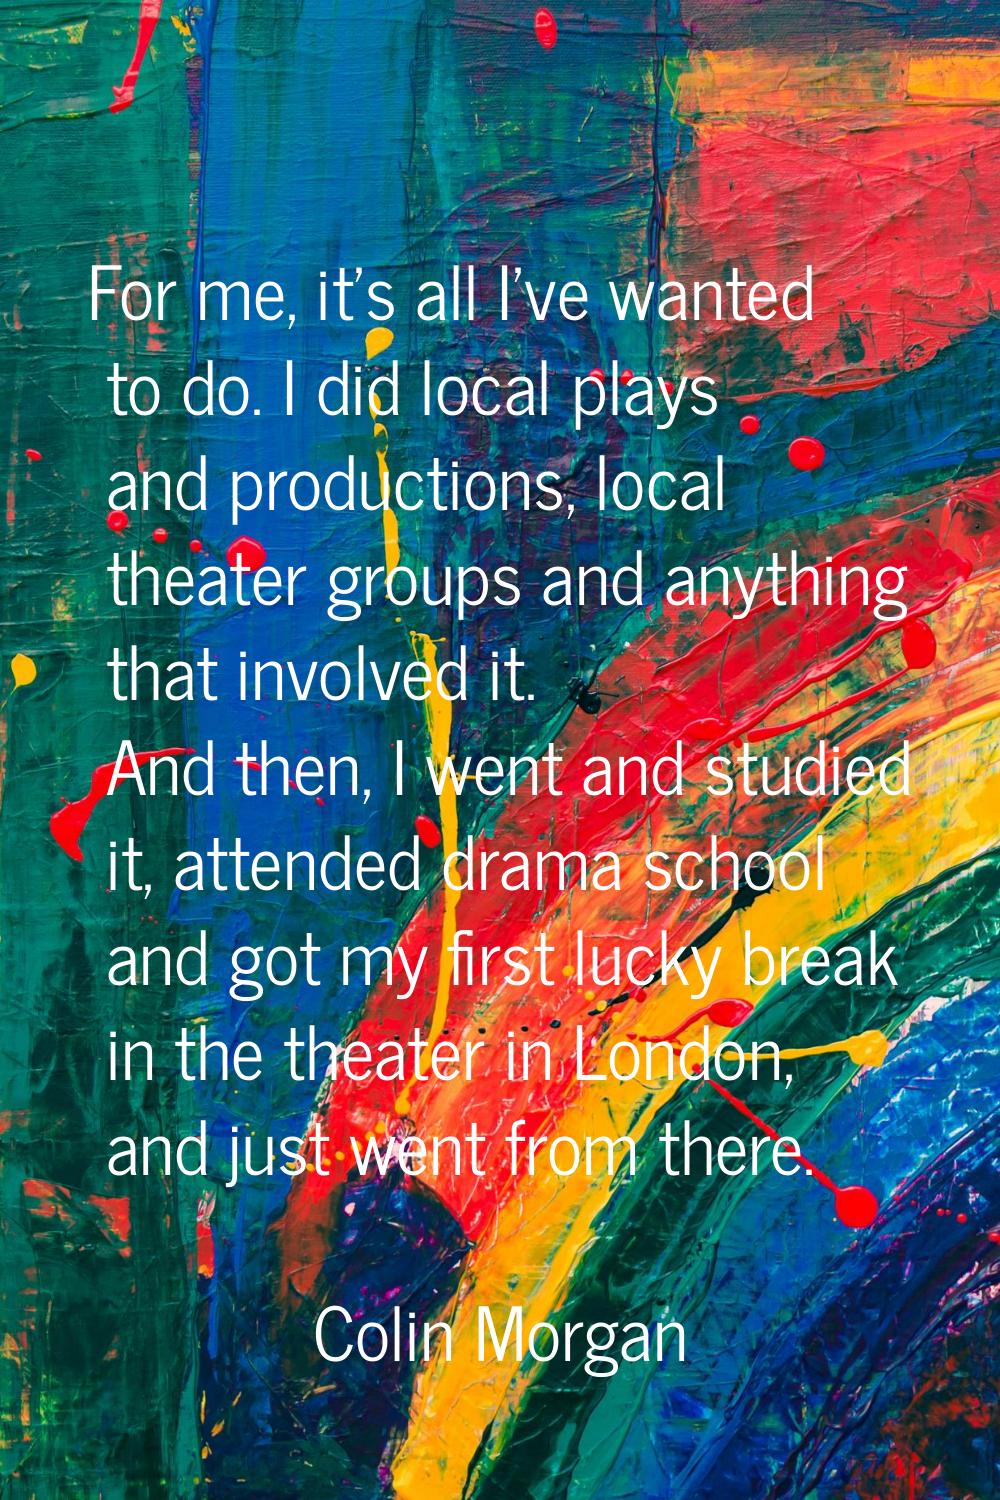 For me, it's all I've wanted to do. I did local plays and productions, local theater groups and any